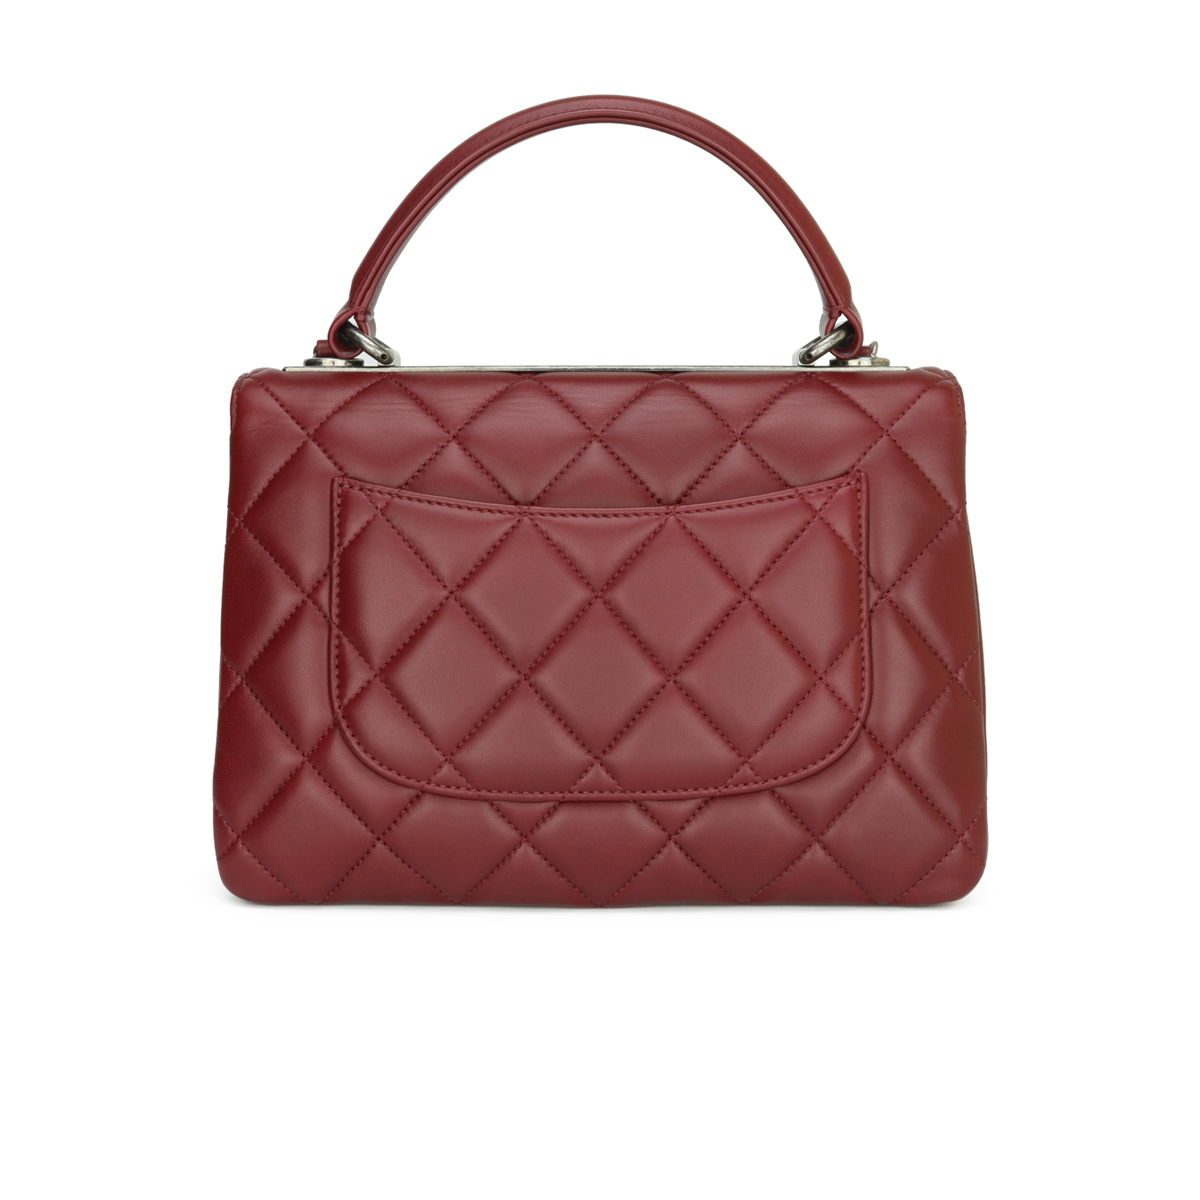 Trendy cc top handle leather handbag Chanel Burgundy in Leather